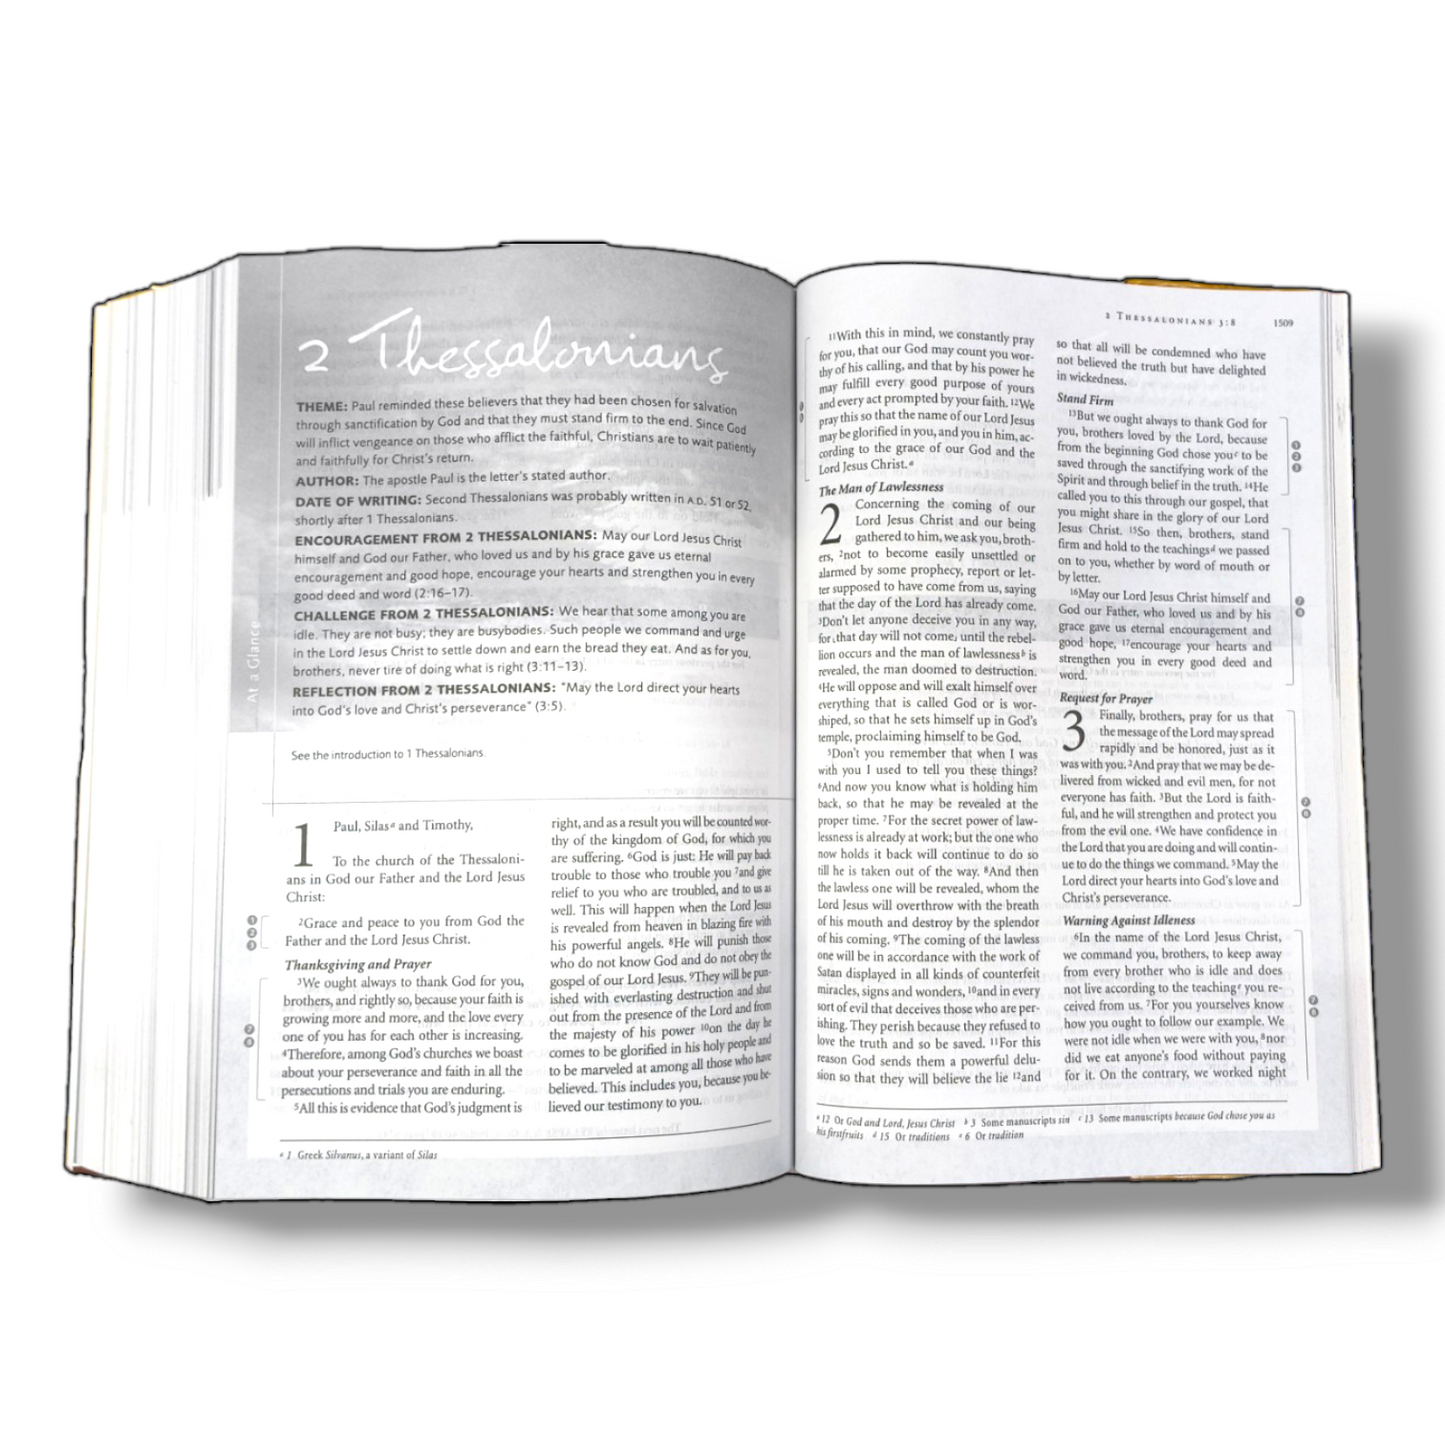 Celebrate Recovery Bible by Zondervan Staff | Study Bible | New Edition |  Hard Bound